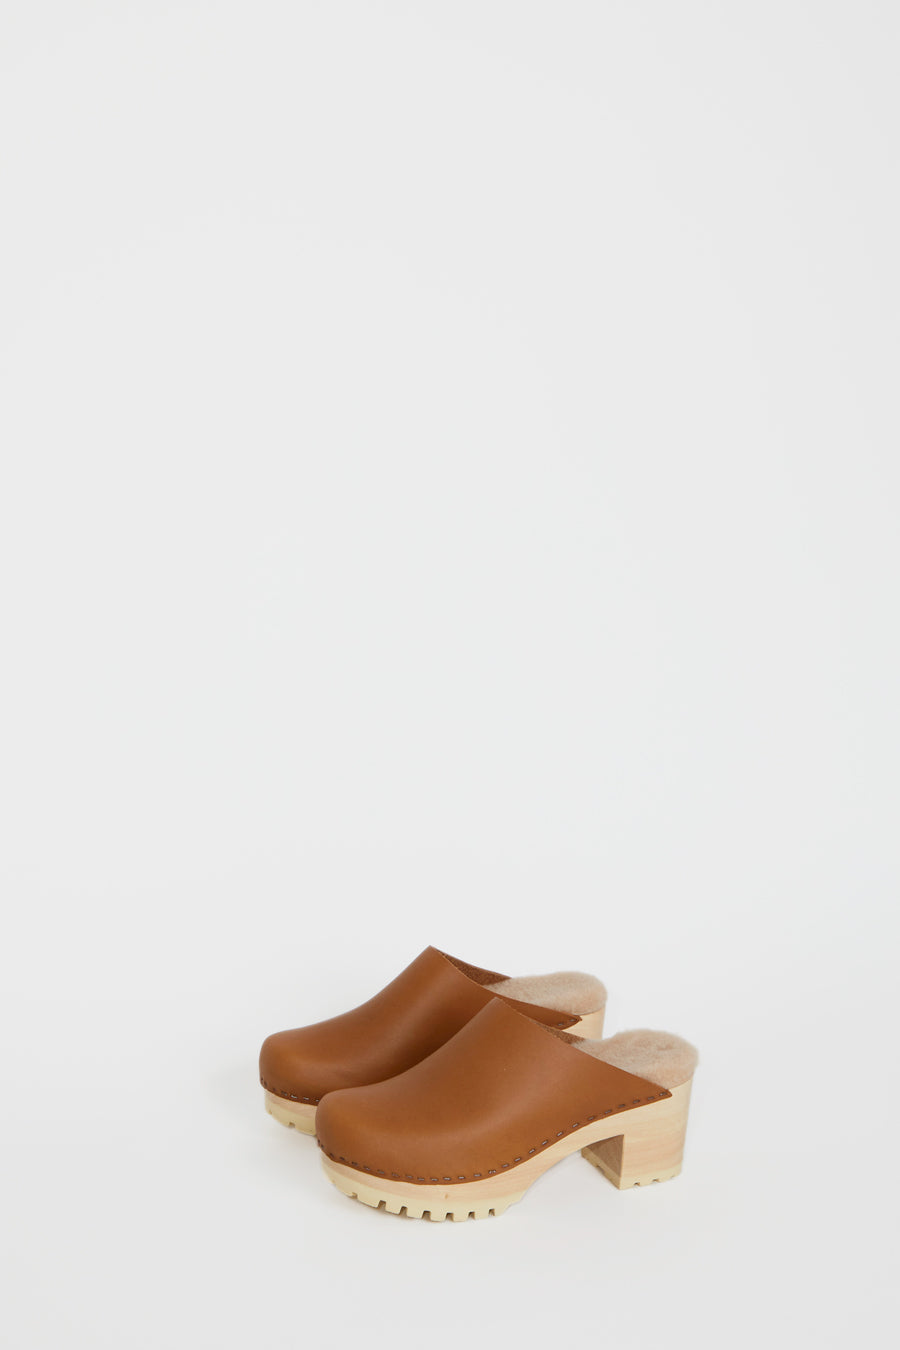 No.6 Liza Clog on Mid Tread in Palomino with Bone Shearling on White Base